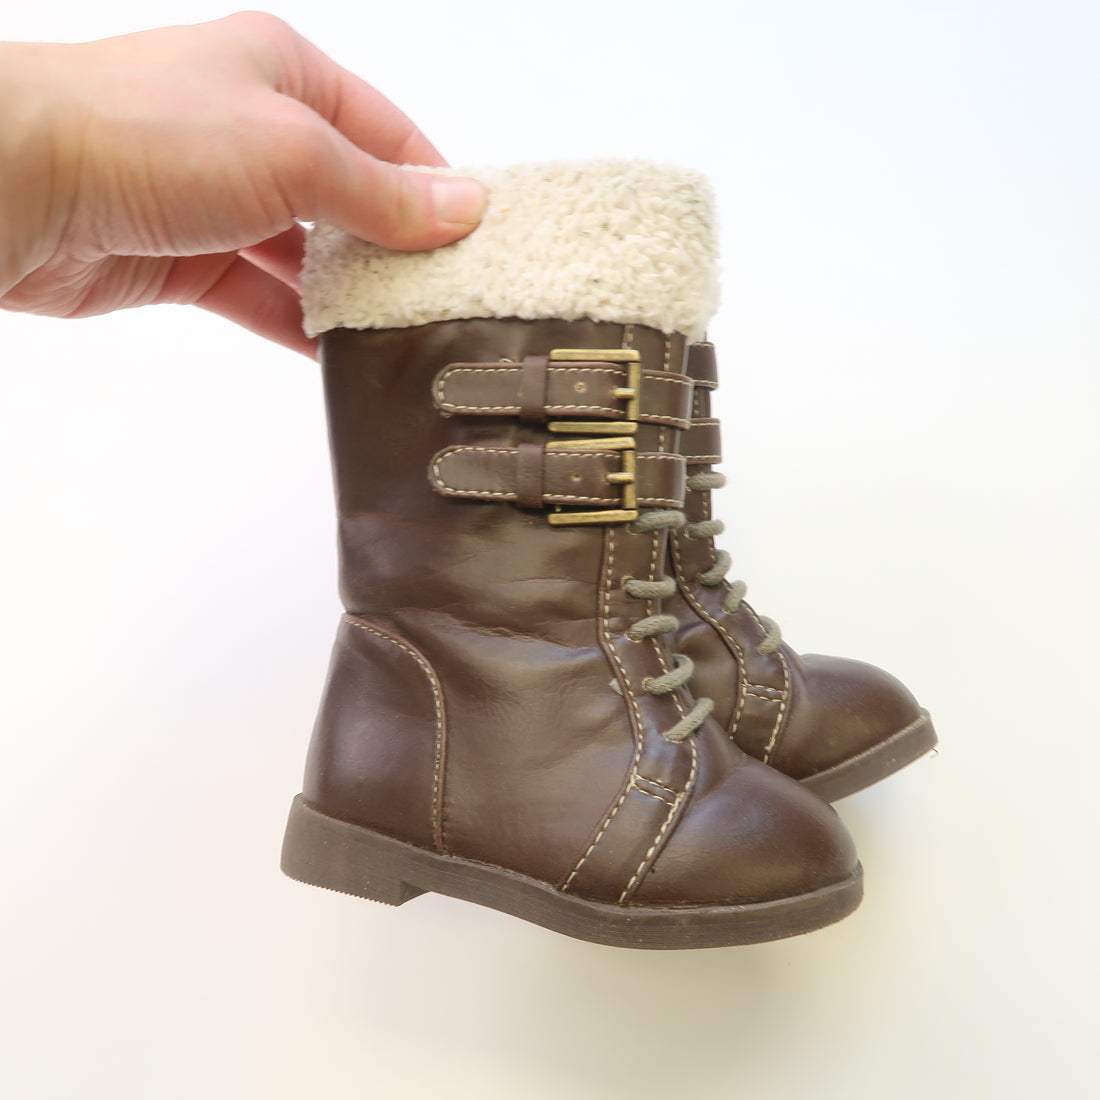 Old Navy - Boots (Shoes - 5)